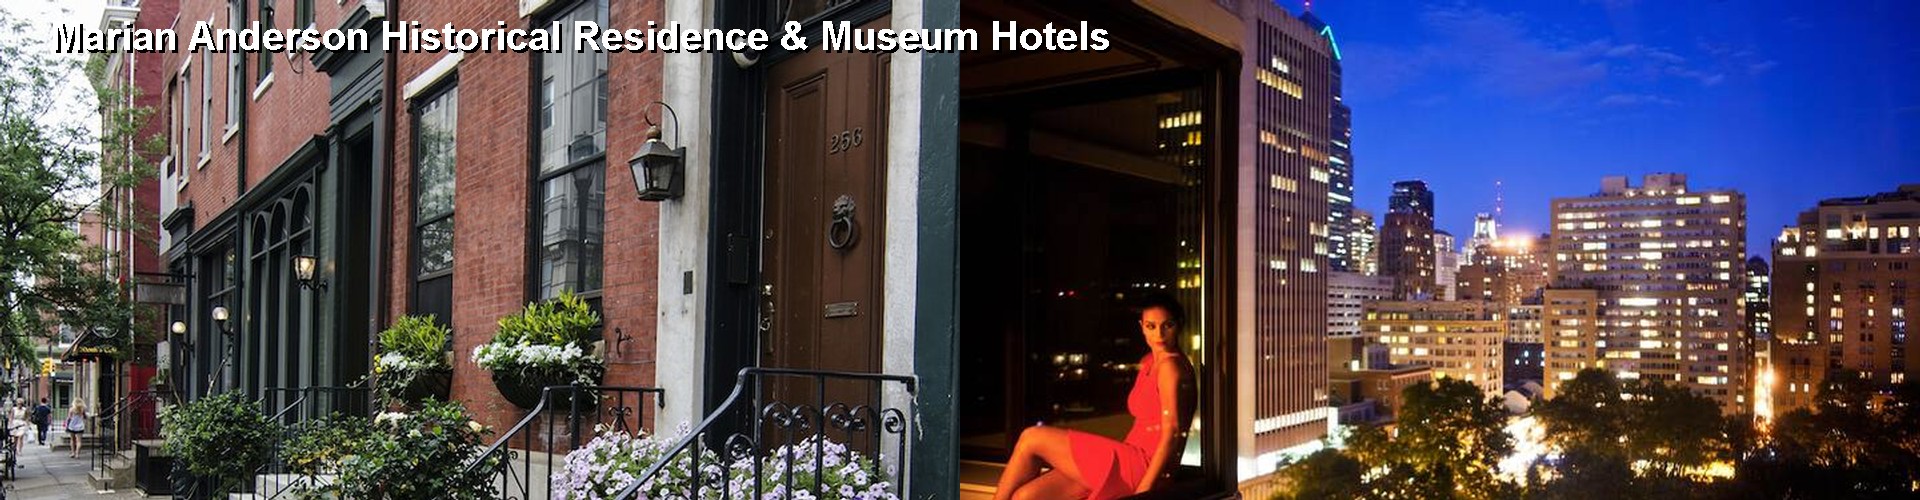 5 Best Hotels near Marian Anderson Historical Residence & Museum